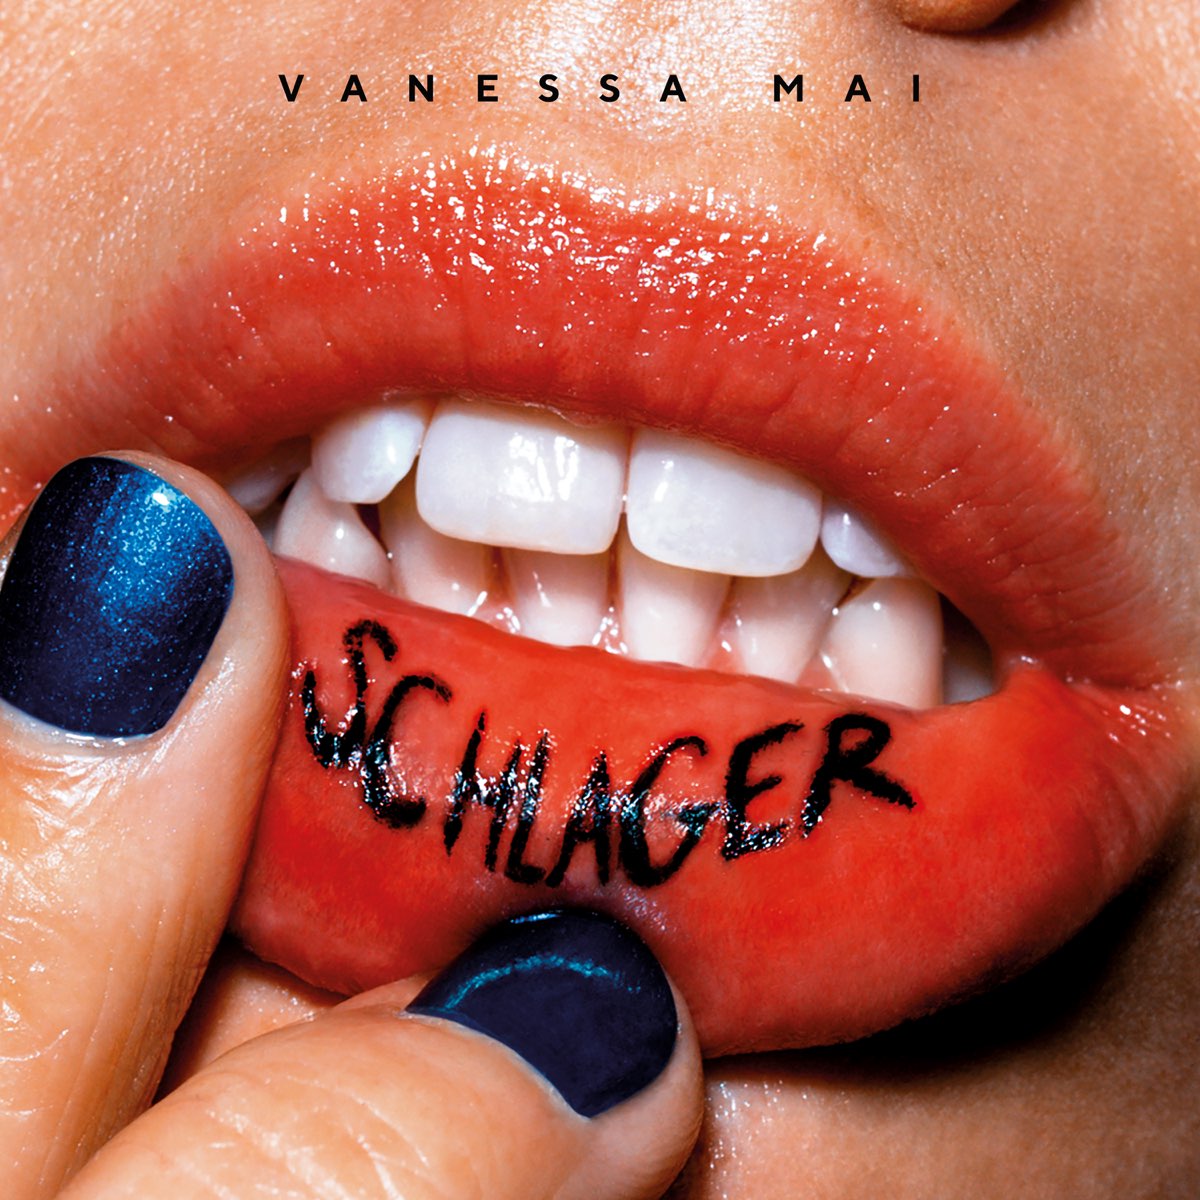 SCHLAGER (Deluxe Edition) by Vanessa Mai on Apple Music